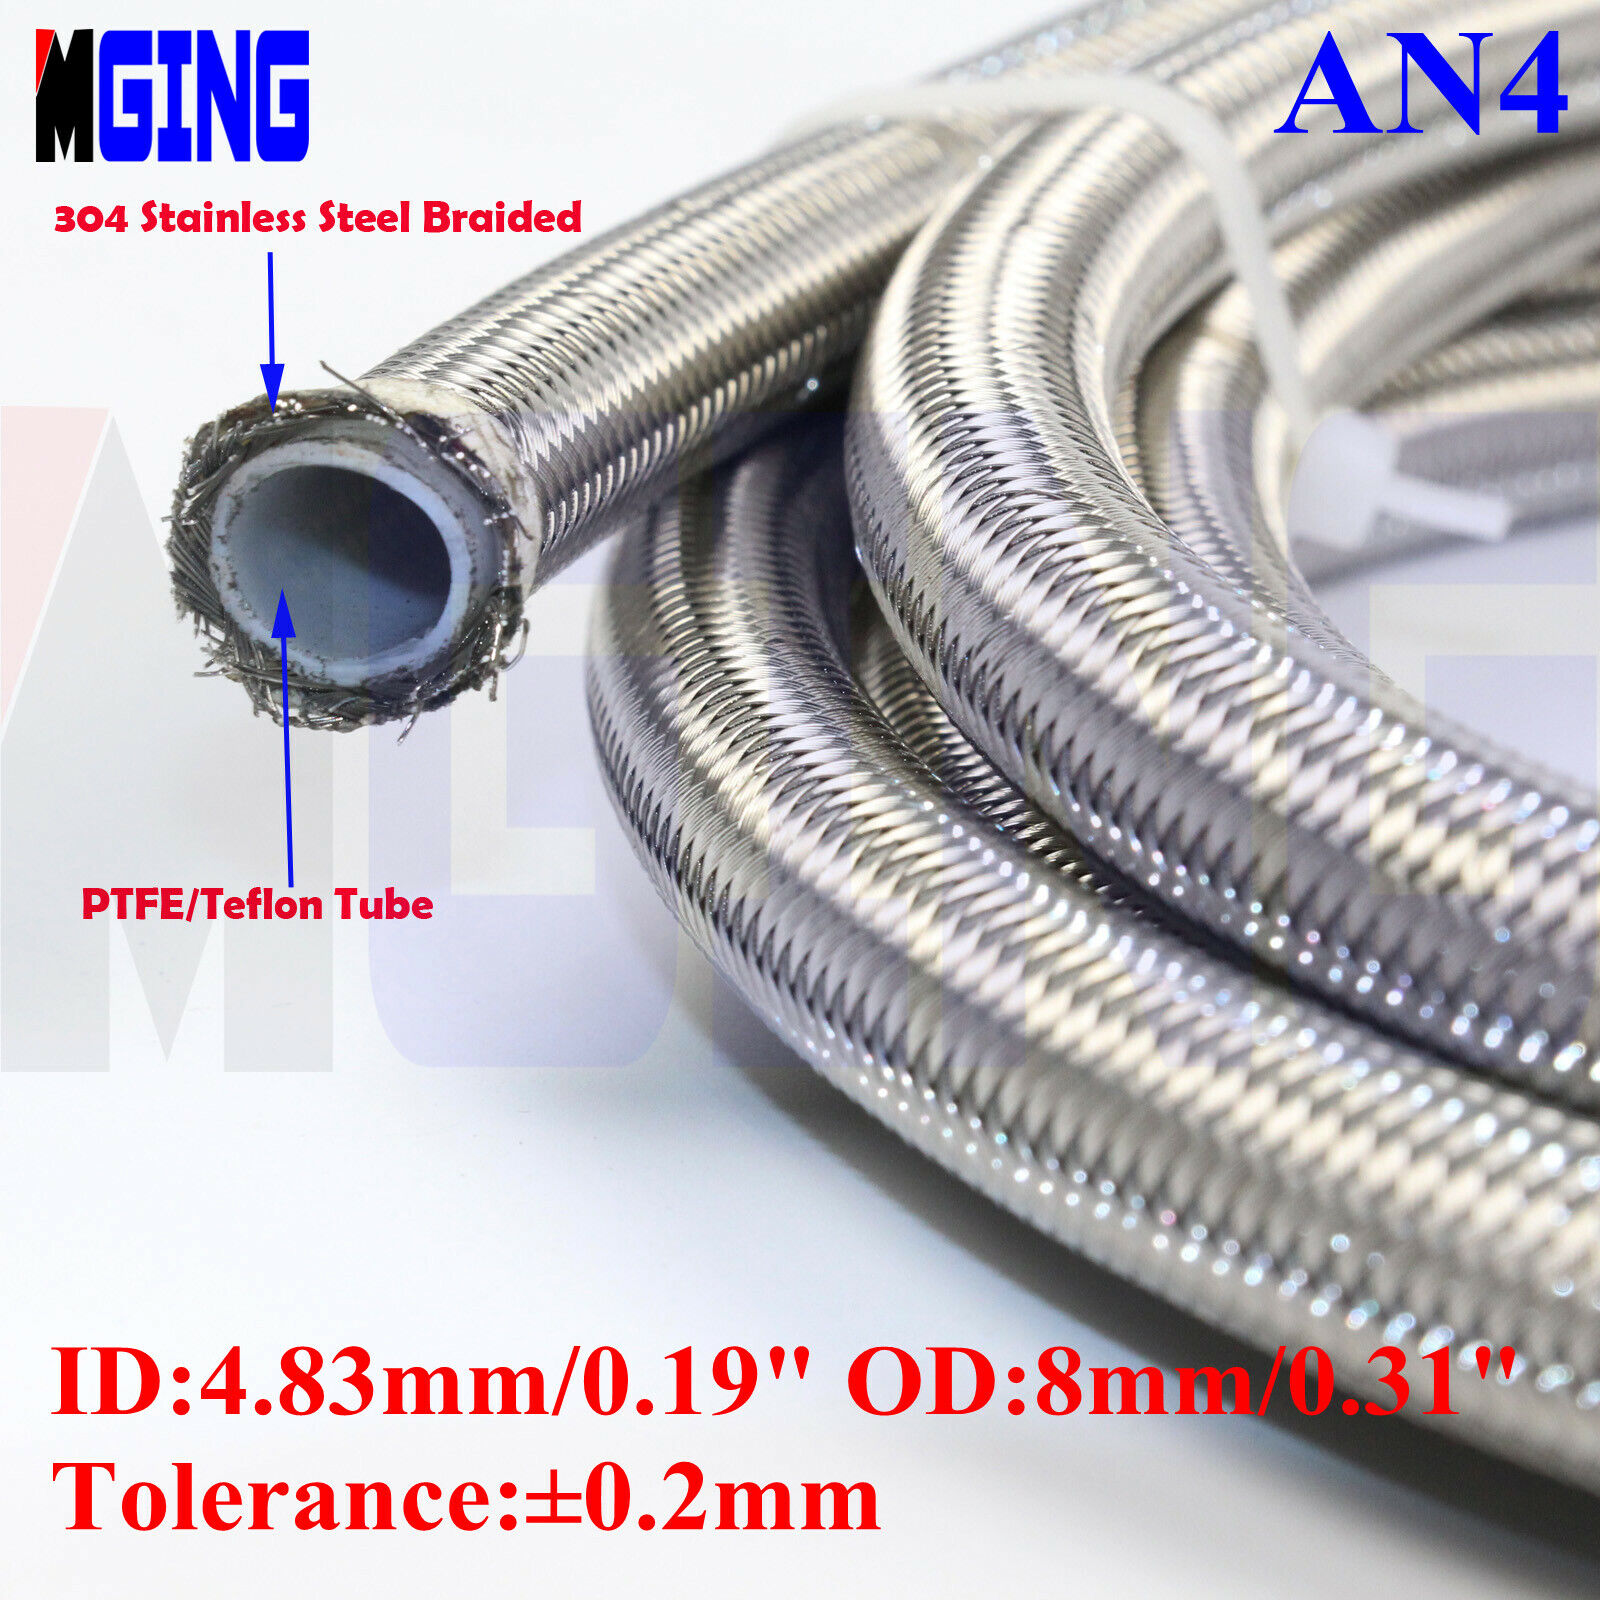 4an an4 4 Stainless Steel Braided oil gas Line E85 Alcohol Fuel